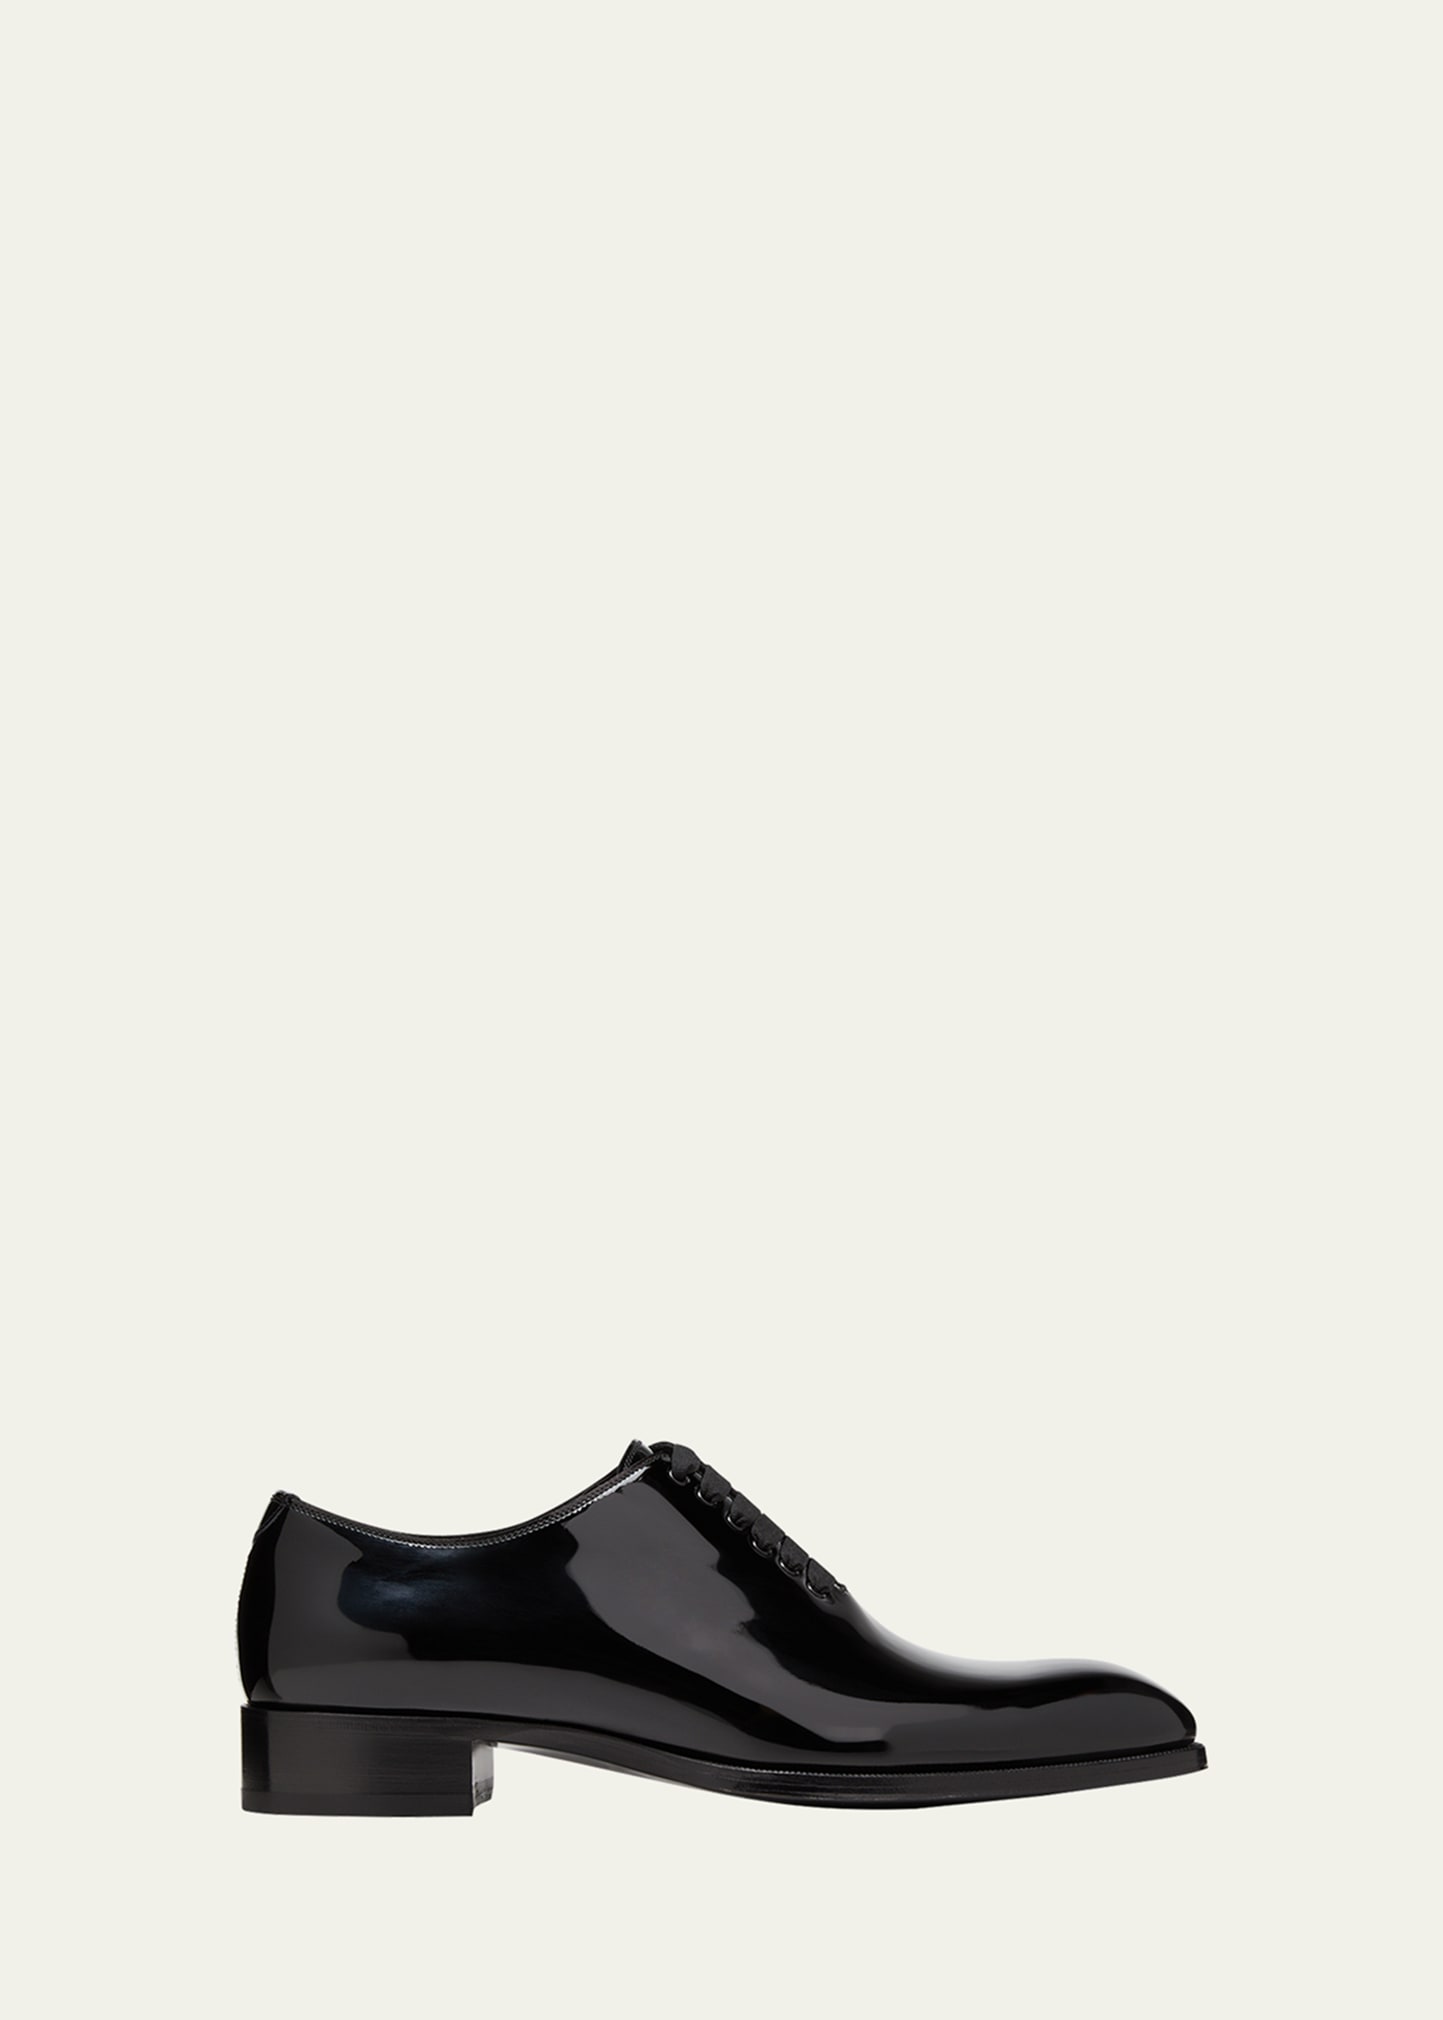 Men's Formal Lace-Up Leather Loafers